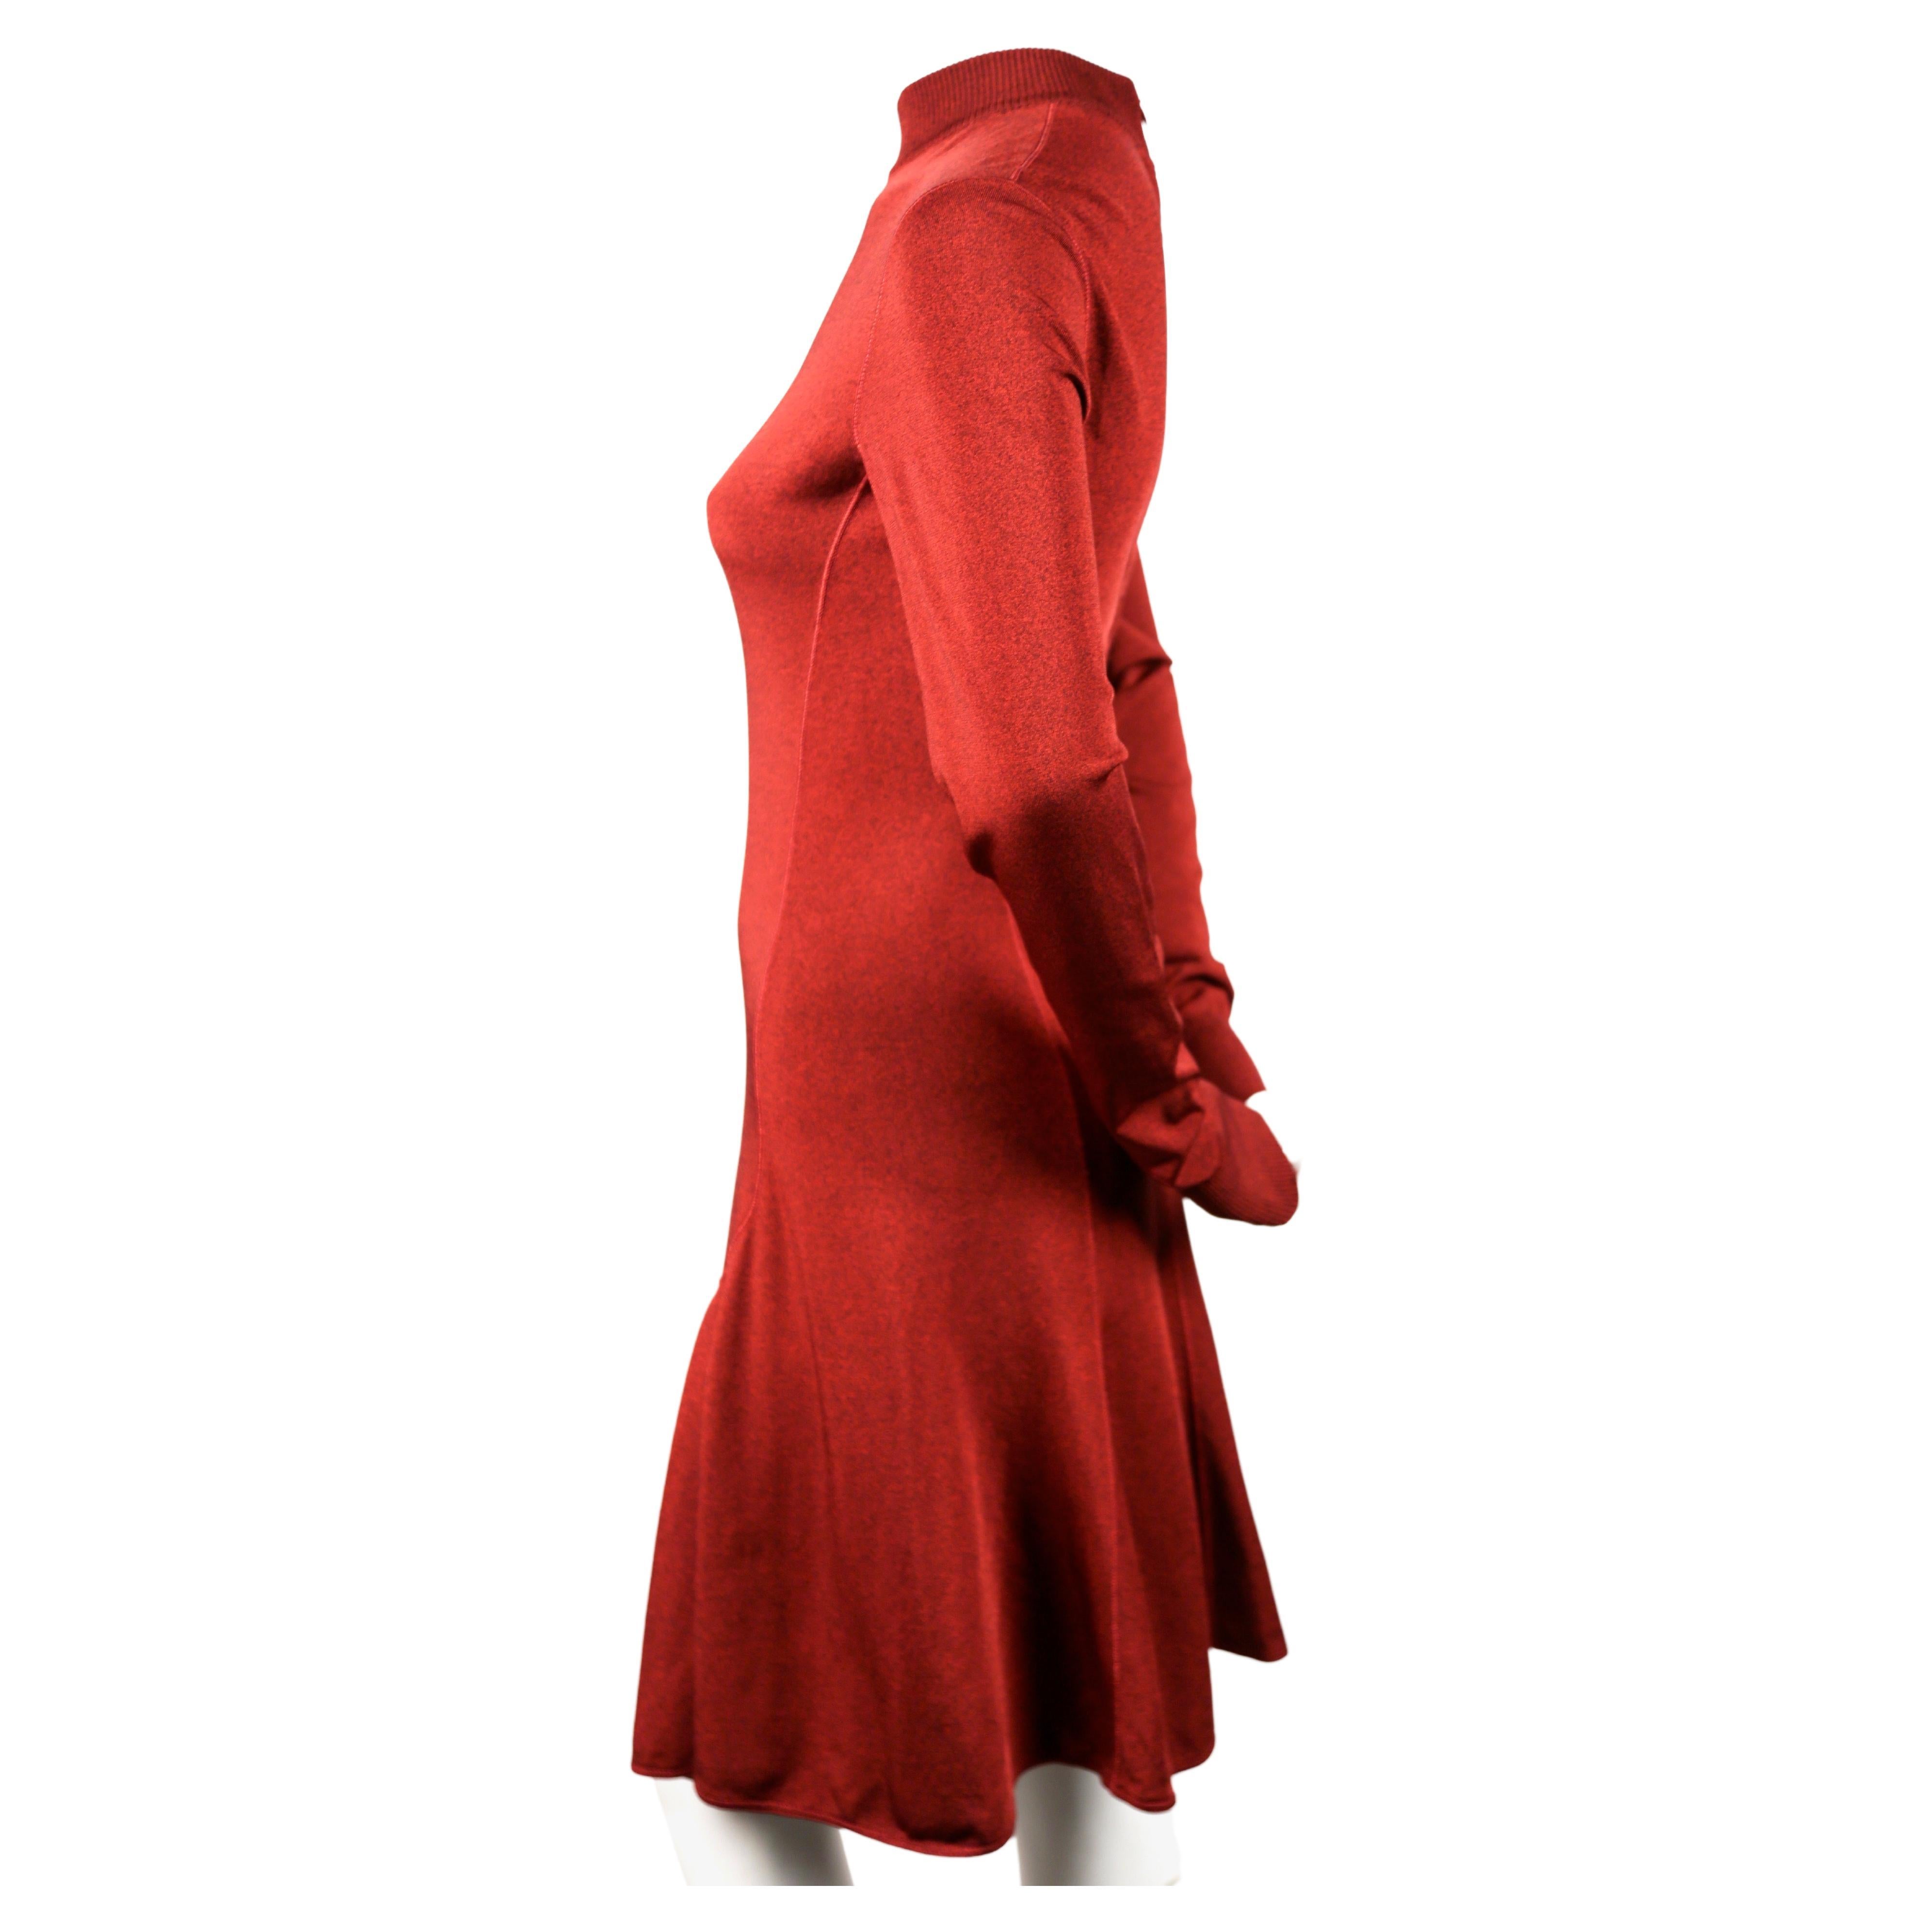 Dark-red, flared dress with high neckline and long sleeves designed by Azzedine Alaia dating to the early 1990's. No size indicated best fits a S or M. Approximate measurements (unstretched): shoulder 15